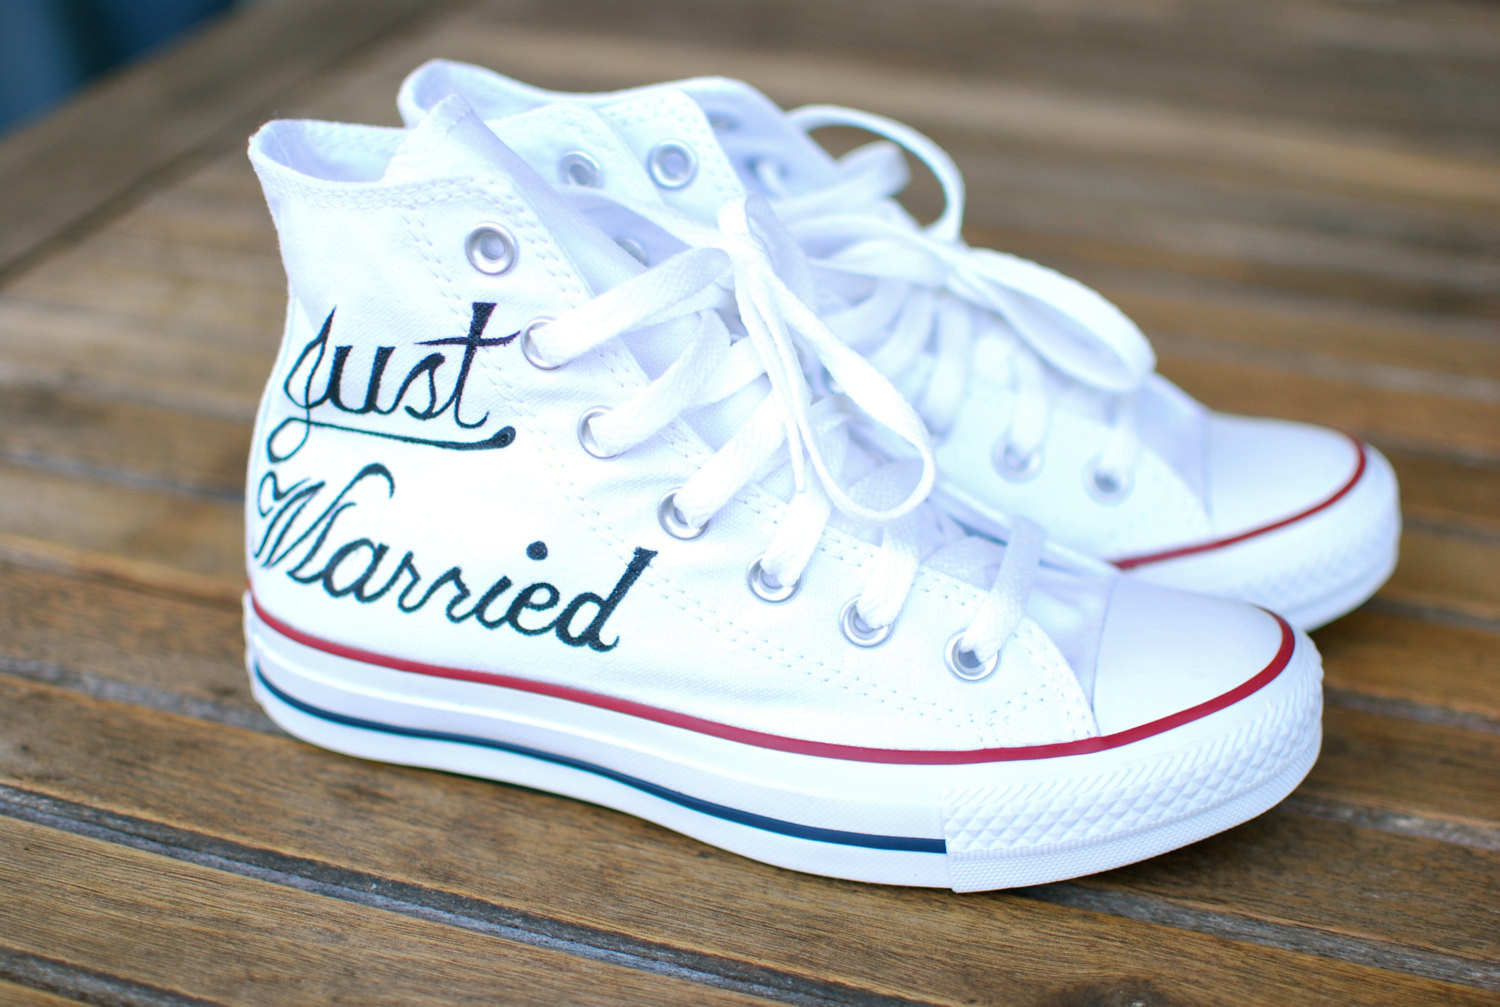 Custom Converse Wedding Shoes
 Custom Hand Painted Just Married Converse Sneakers Optical